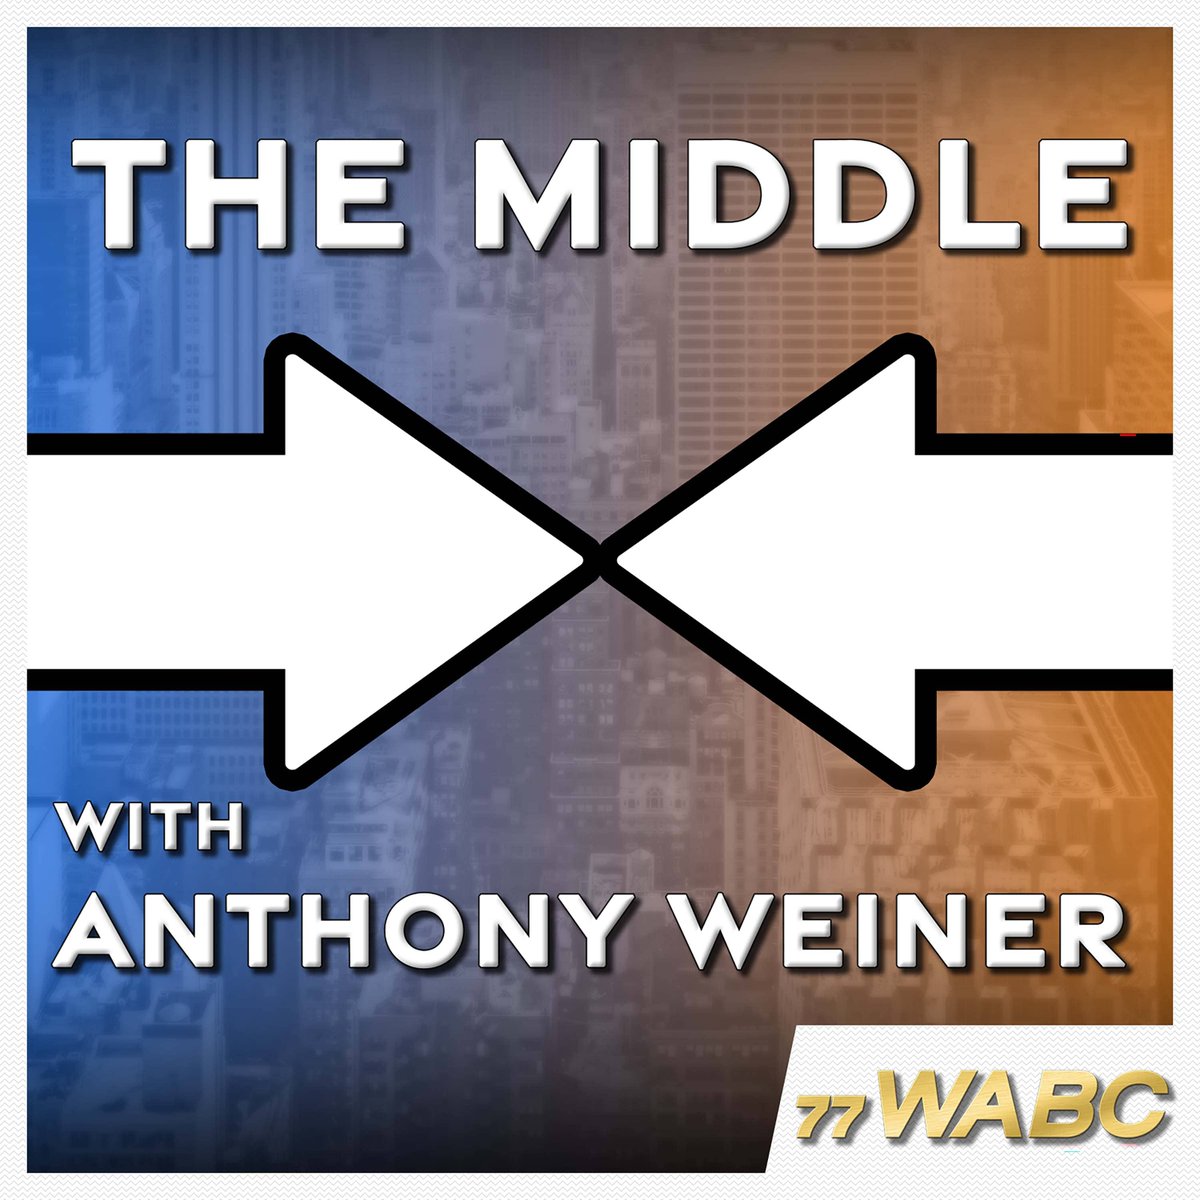 Trump trials and Columbia chaos.  This week on The Middle with Anthony Weiner, @repweiner unpacks a week of news overload Saturday from 2-4 on wabcradio.com or @77wabcradio.